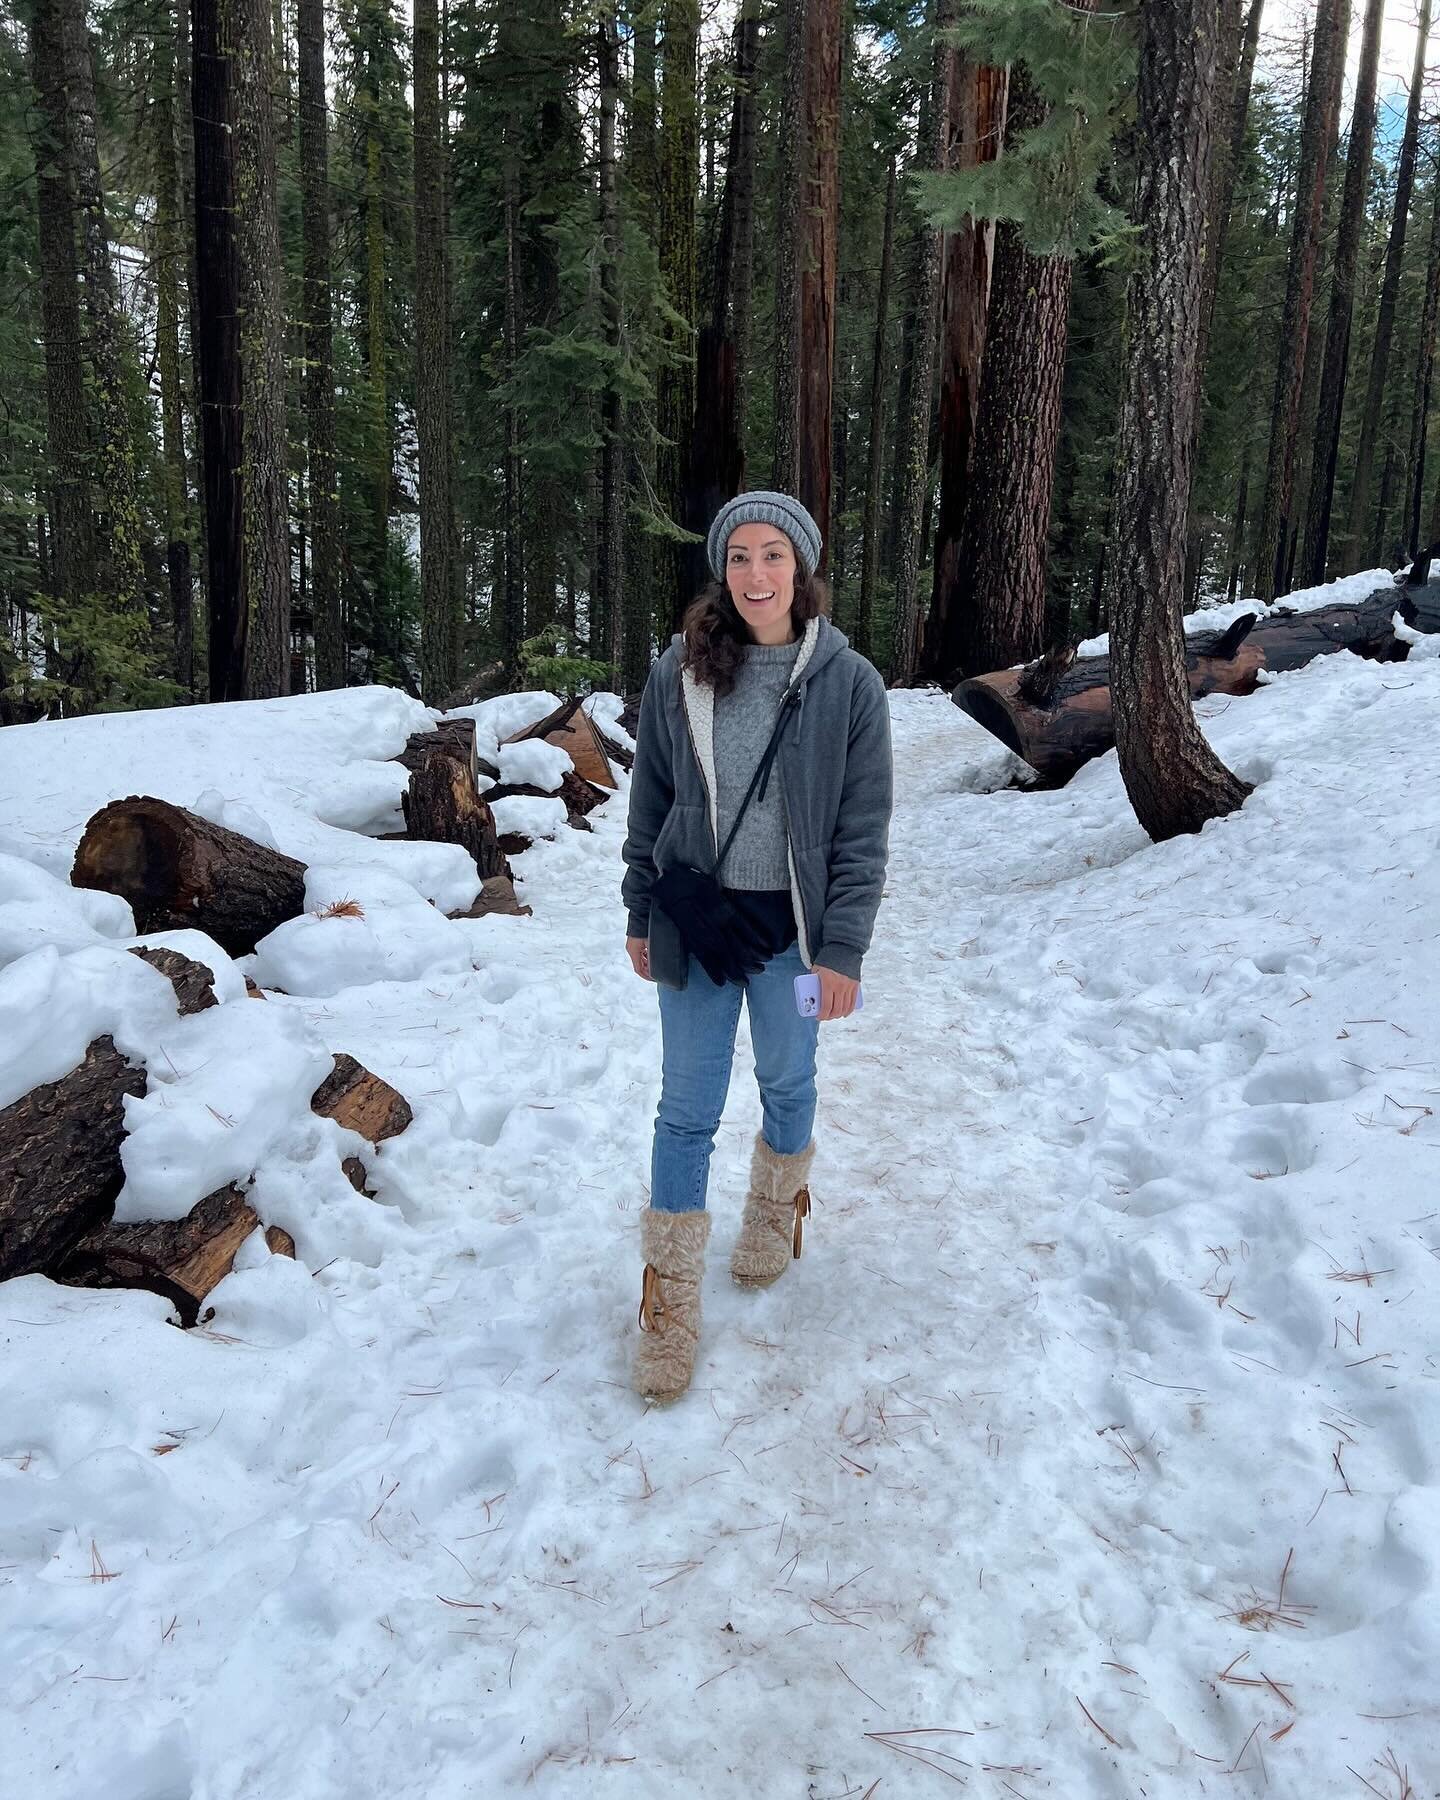 Mariposa Grove of Giant Sequoias in Yosemite is one of my favorite spots in the park. Parking is really close to the south entrance it&rsquo;s about 30minutes away from the Tunnel View. In winter season Yosemite shuttle does not operate from December